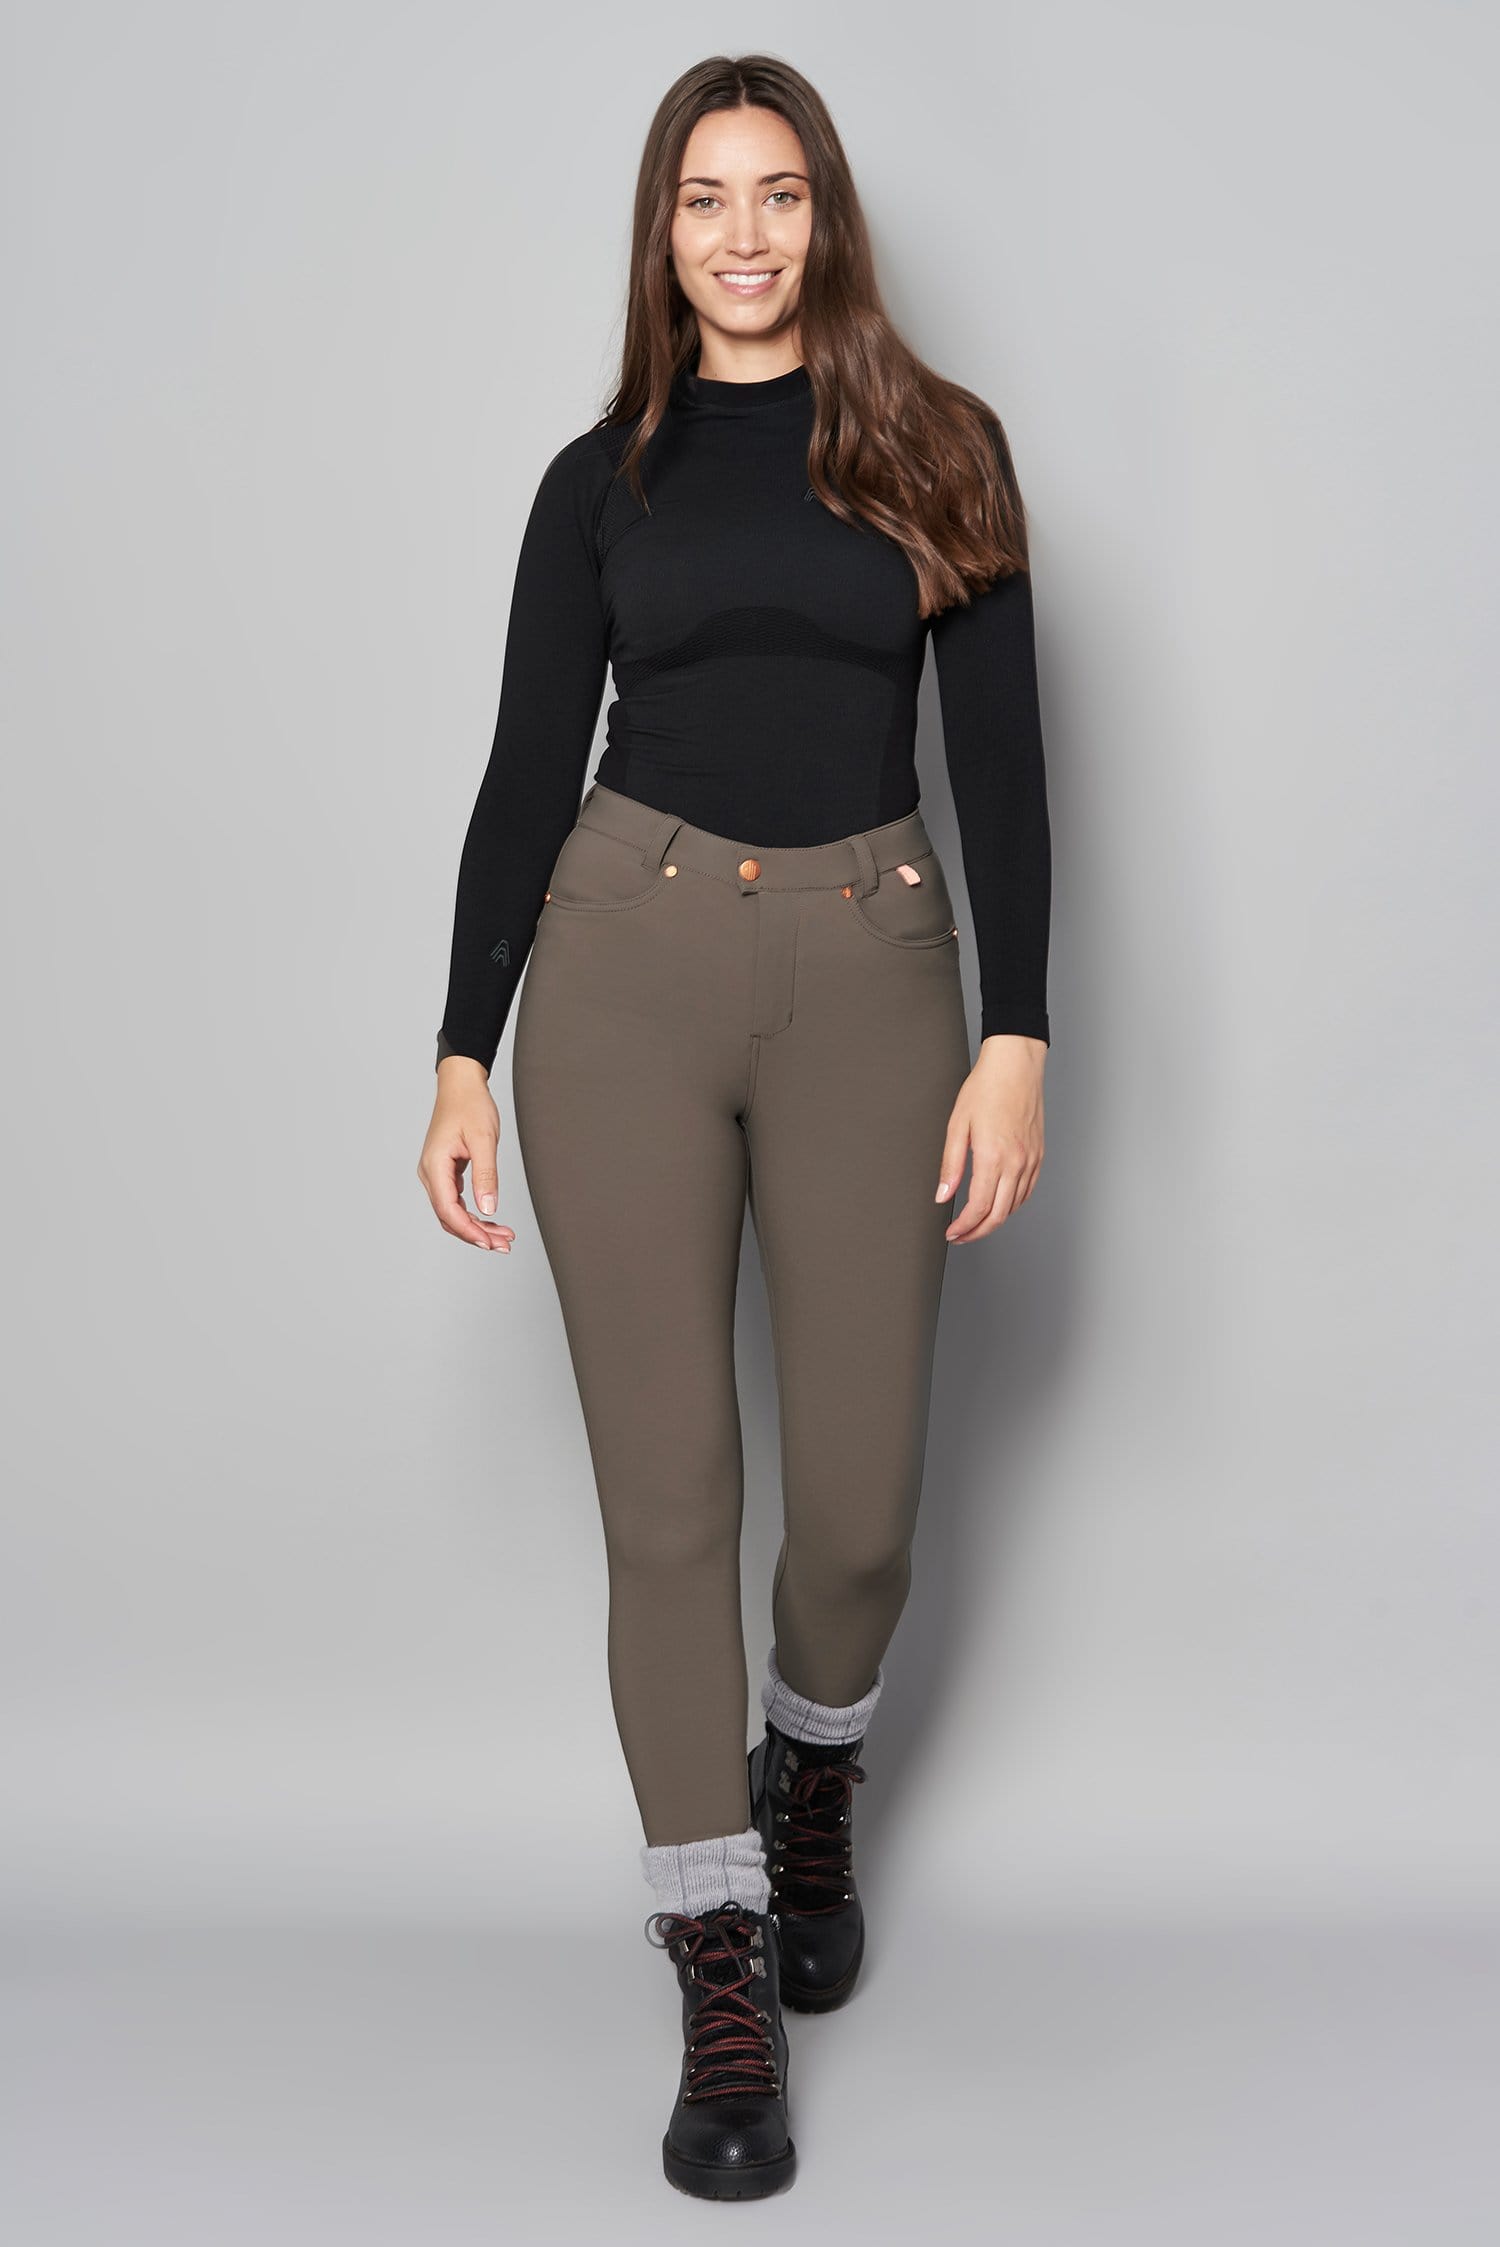 MAX Stretch Skinny Outdoor Trousers - Sand - ACAI Activewear